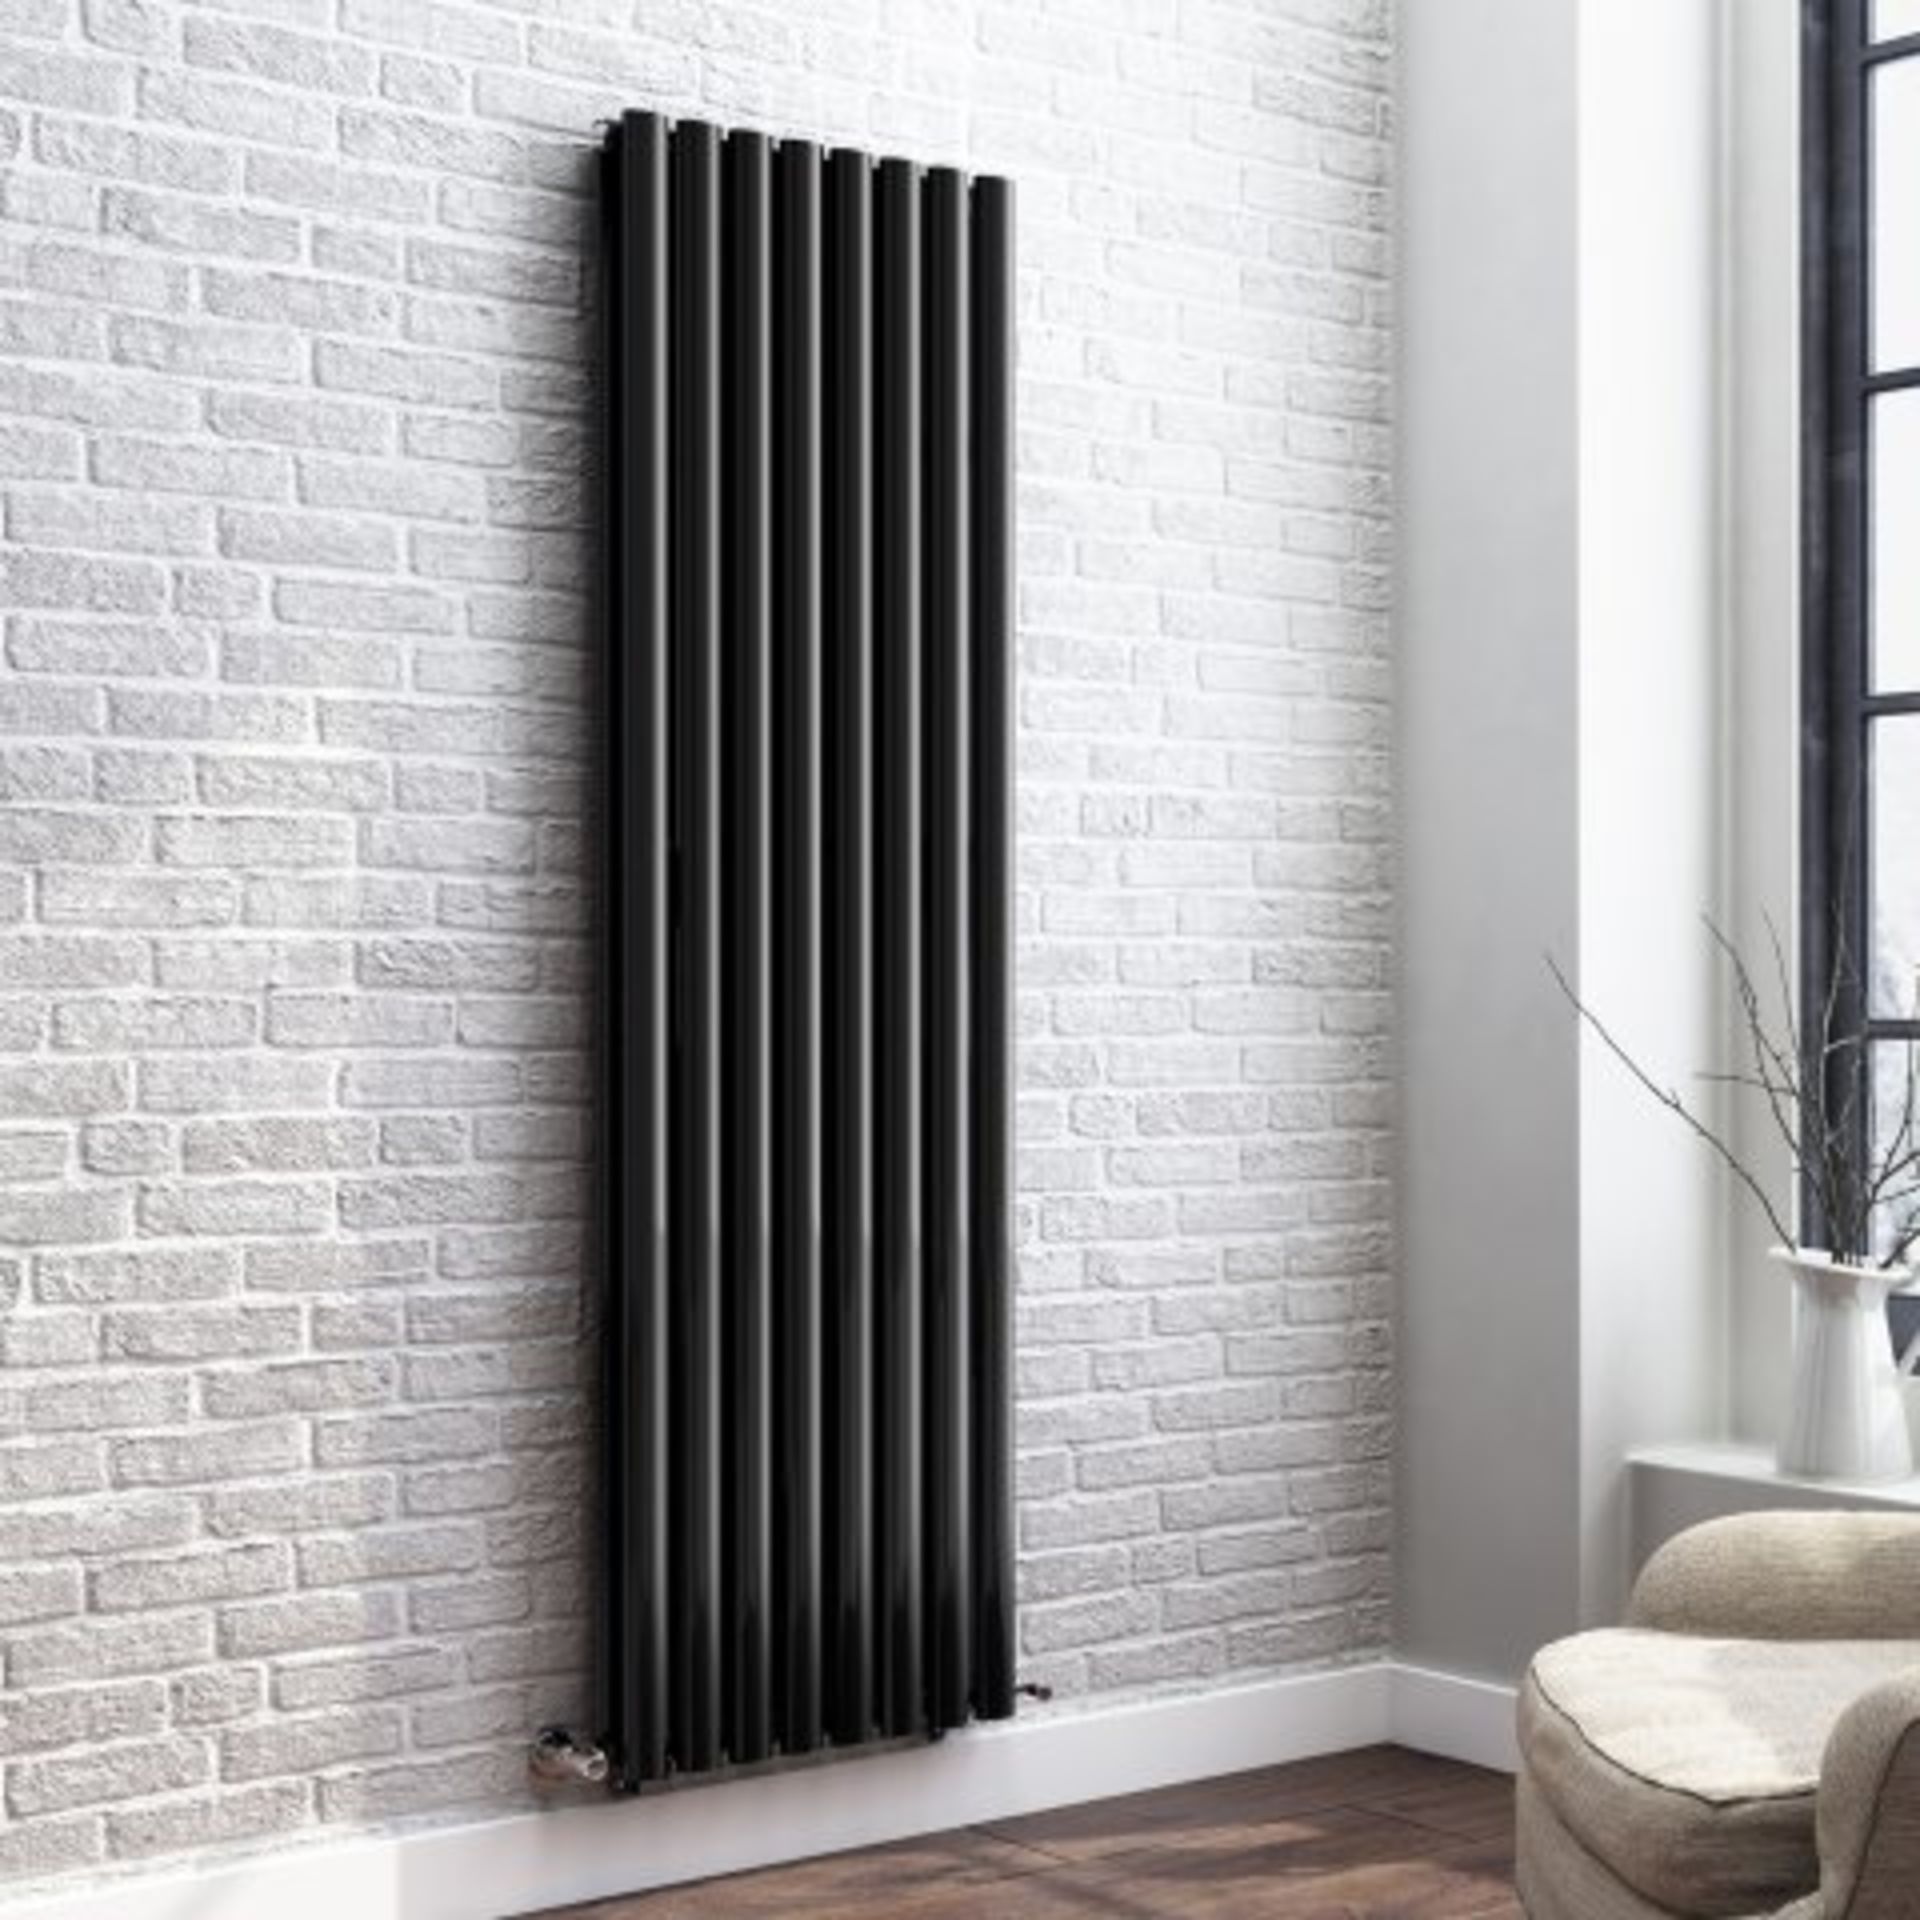 (A534) 1600x480mm Black Double Oval Tube Vertical Radiator - Ember Premium. RRP £351.98. Want to add - Image 4 of 4